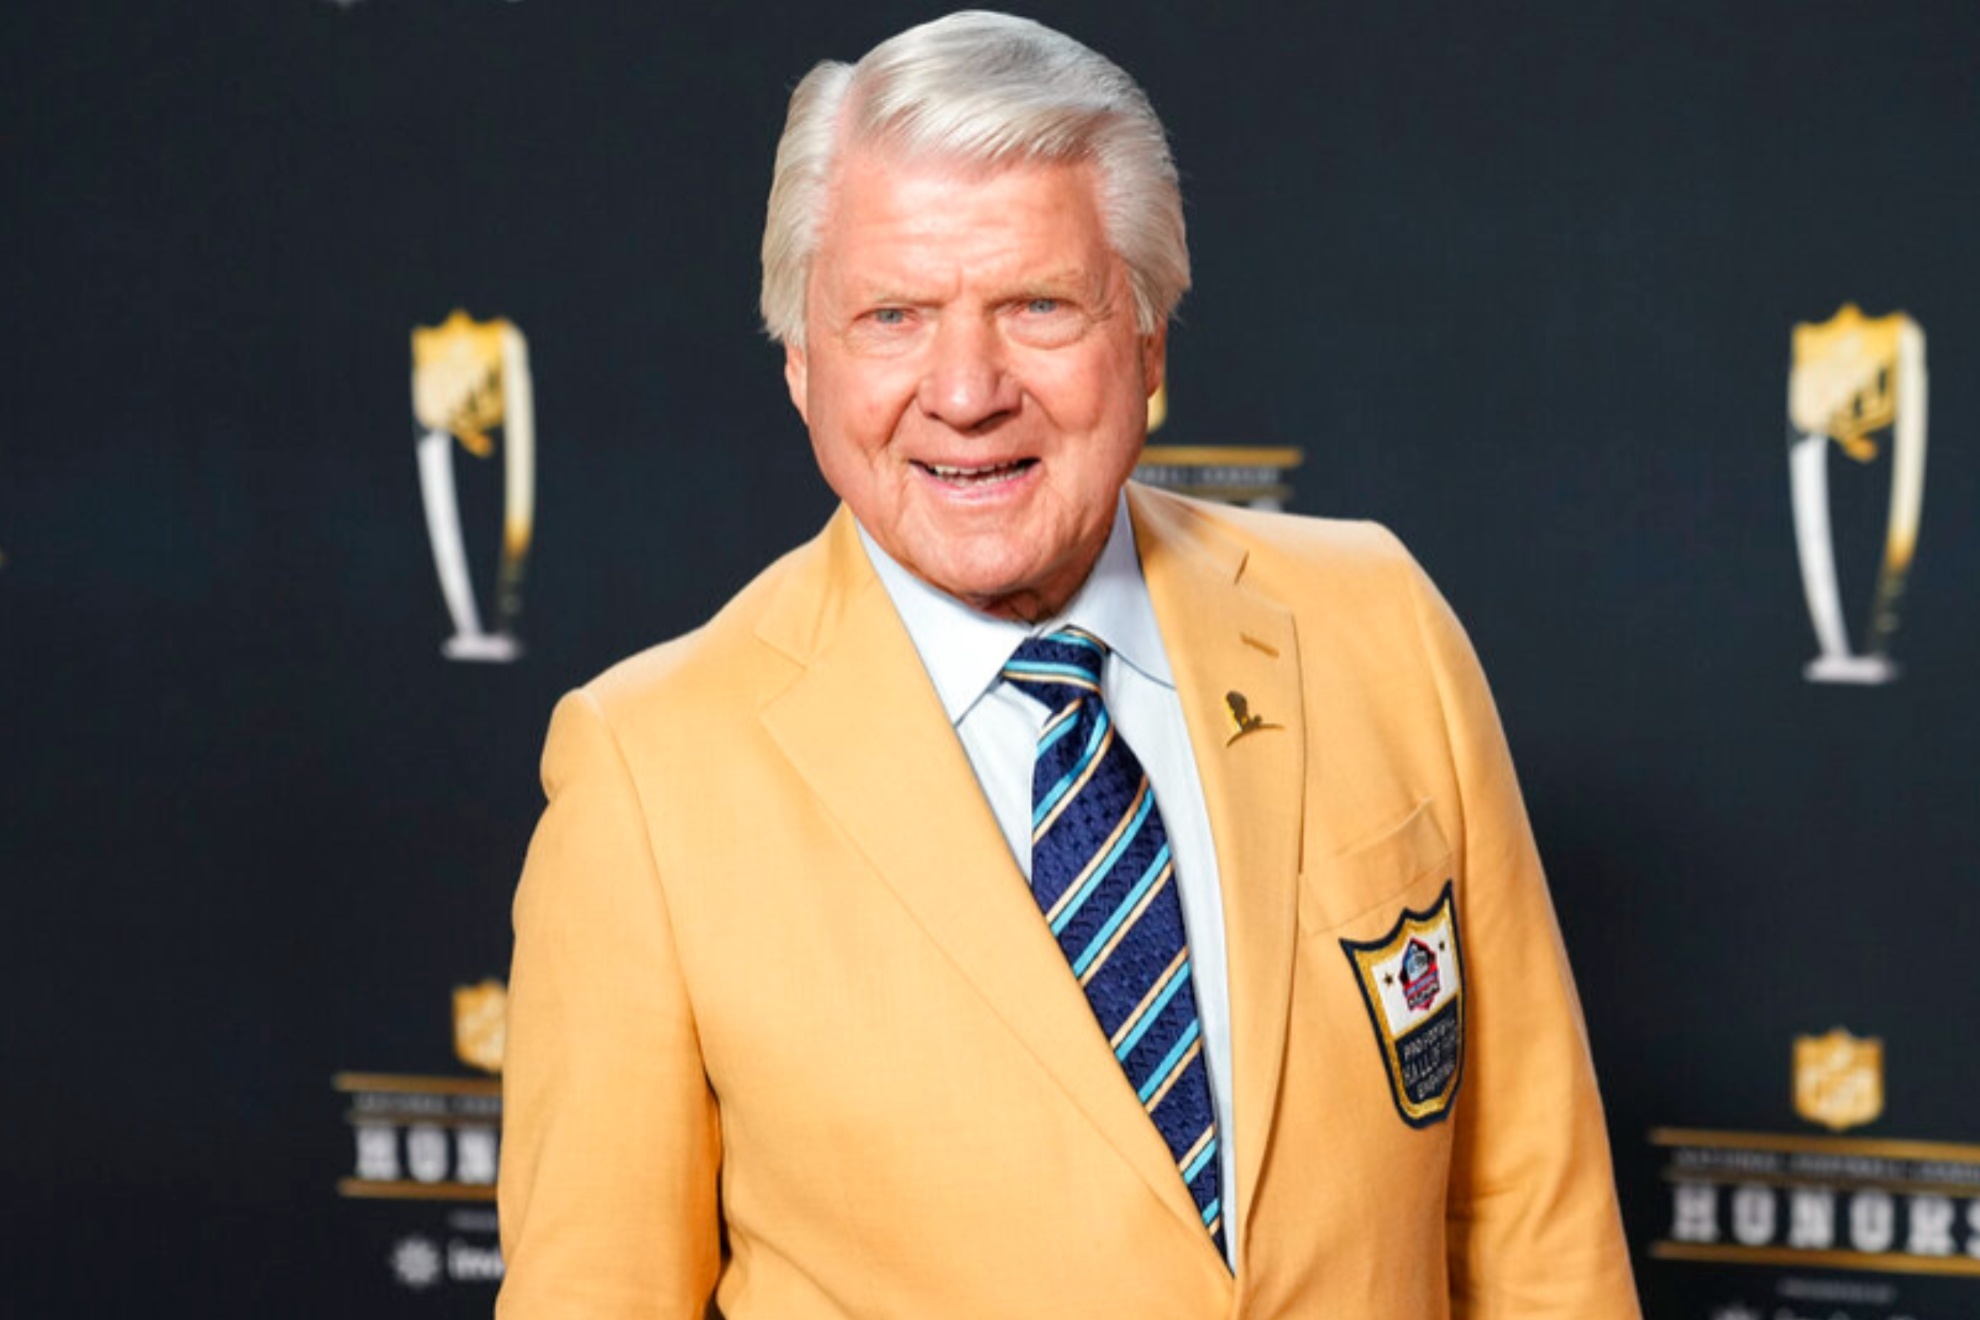 Jimmy Johnson will be inducted into the Cowboys' ring of honor in December